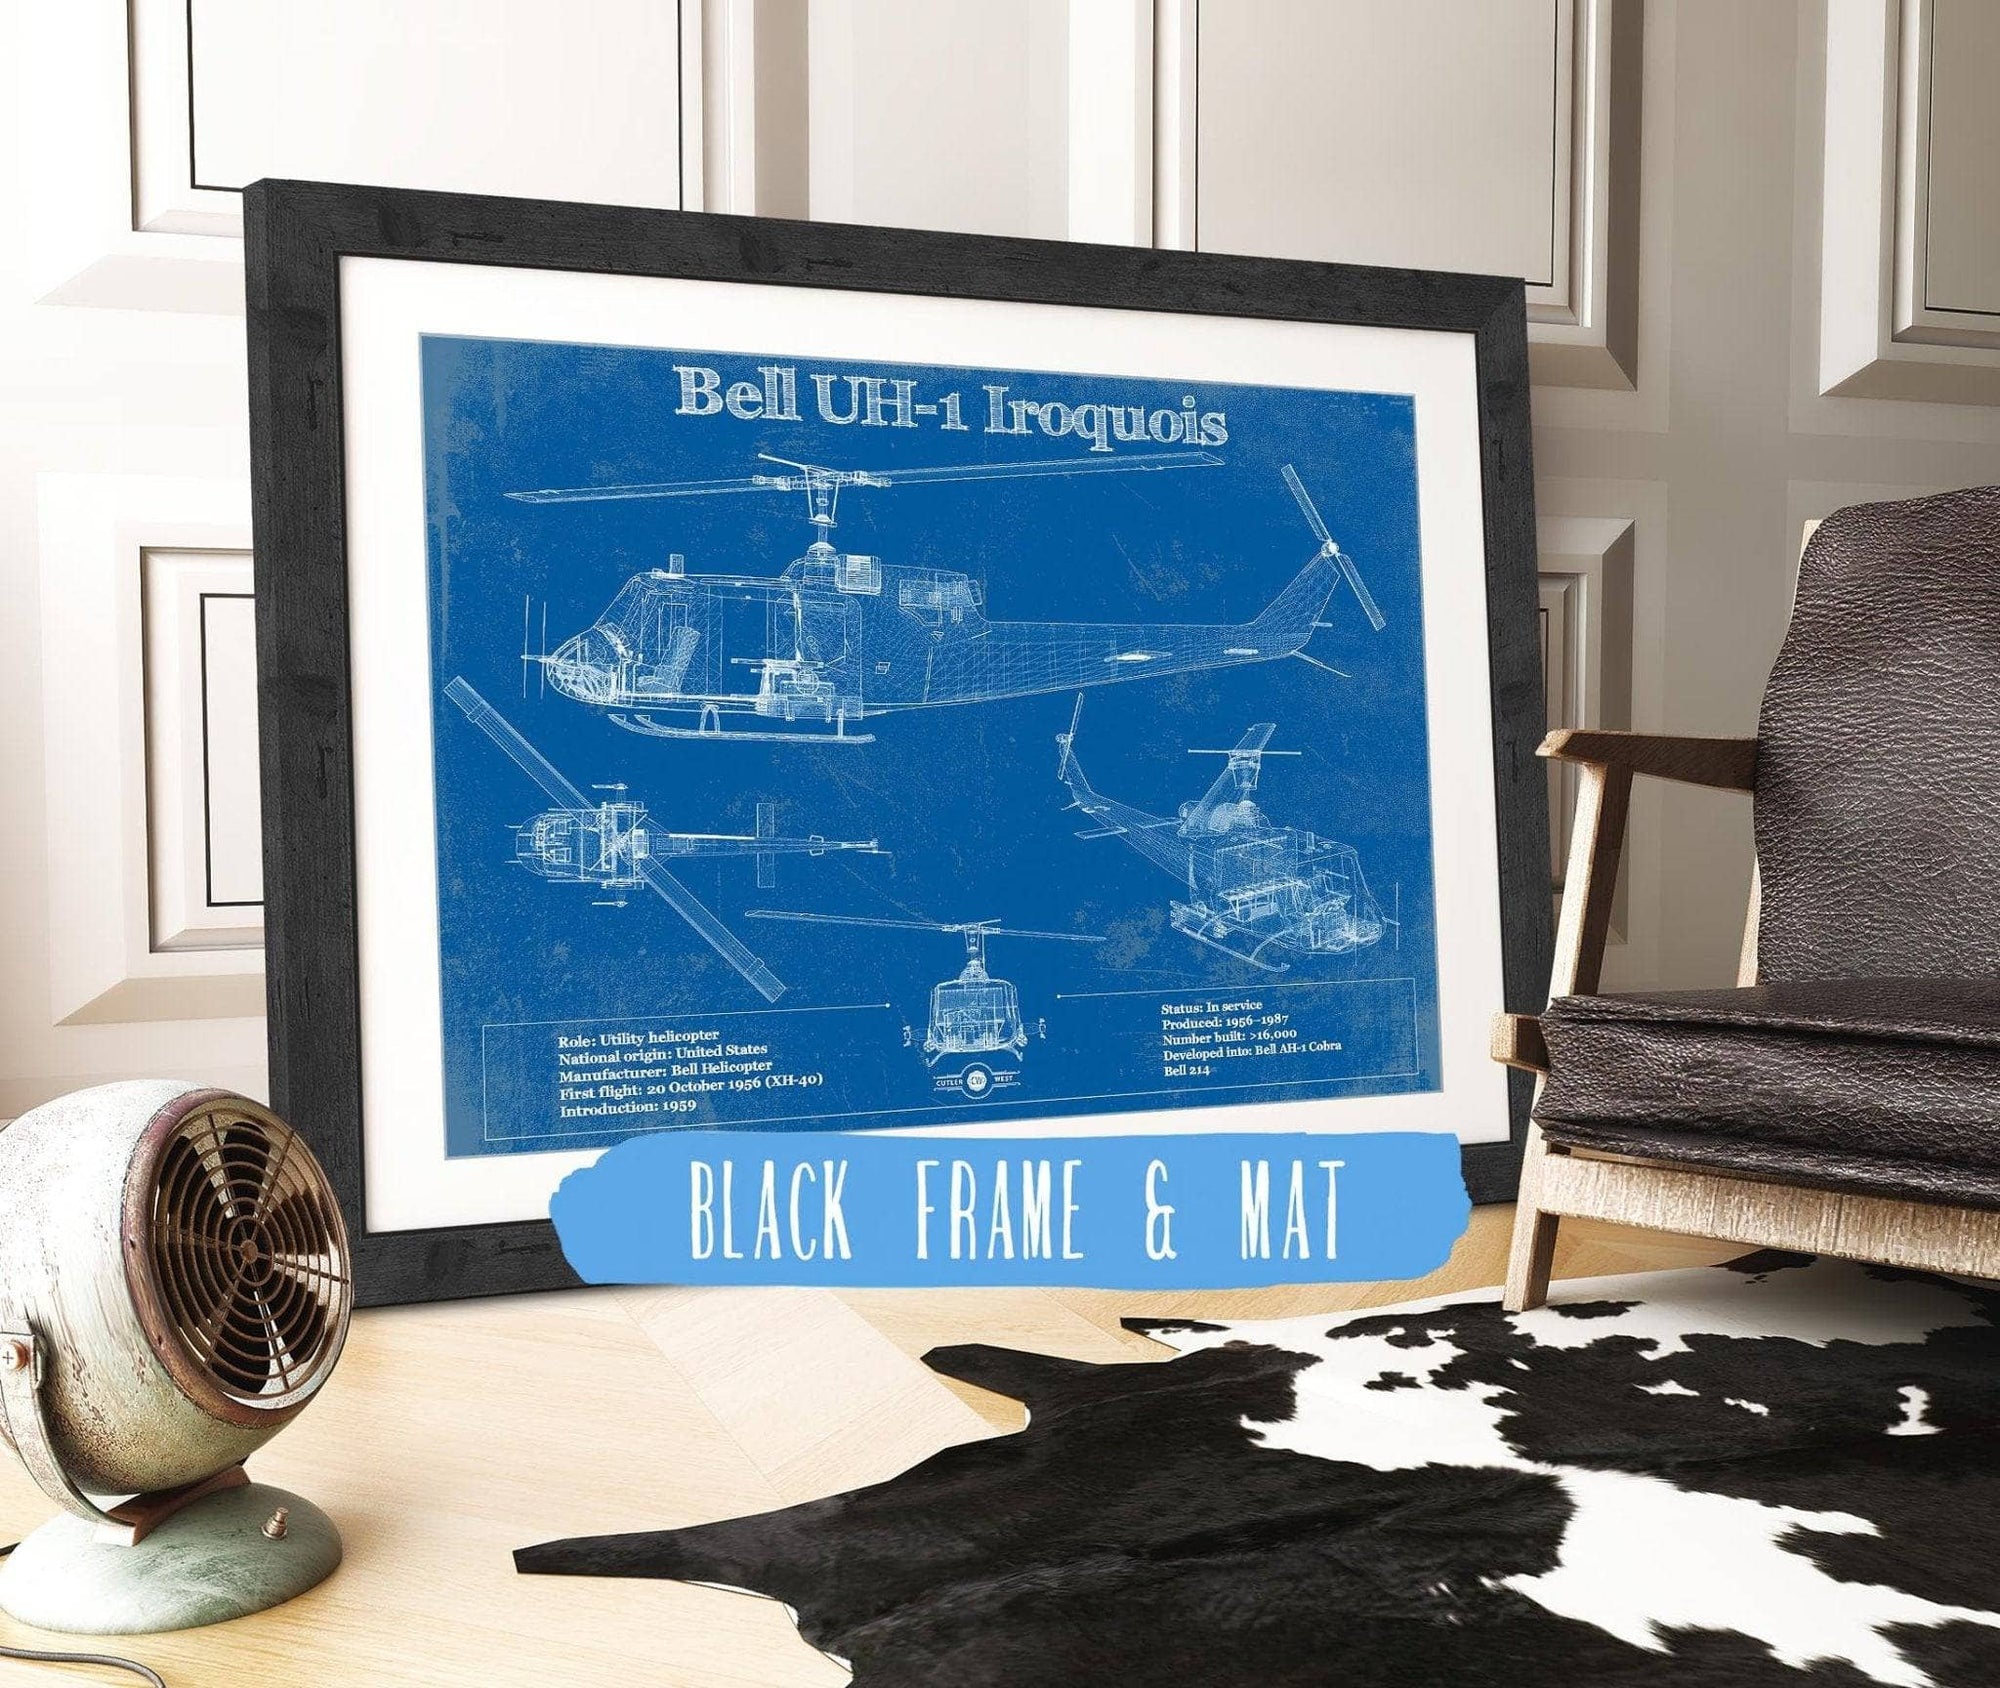 Cutler West Military Aircraft 14" x 11" / Black Frame & Mat Bell UH-1 Iroquois (Huey) Vintage Blueprint Helicopter Print 833110167_35341